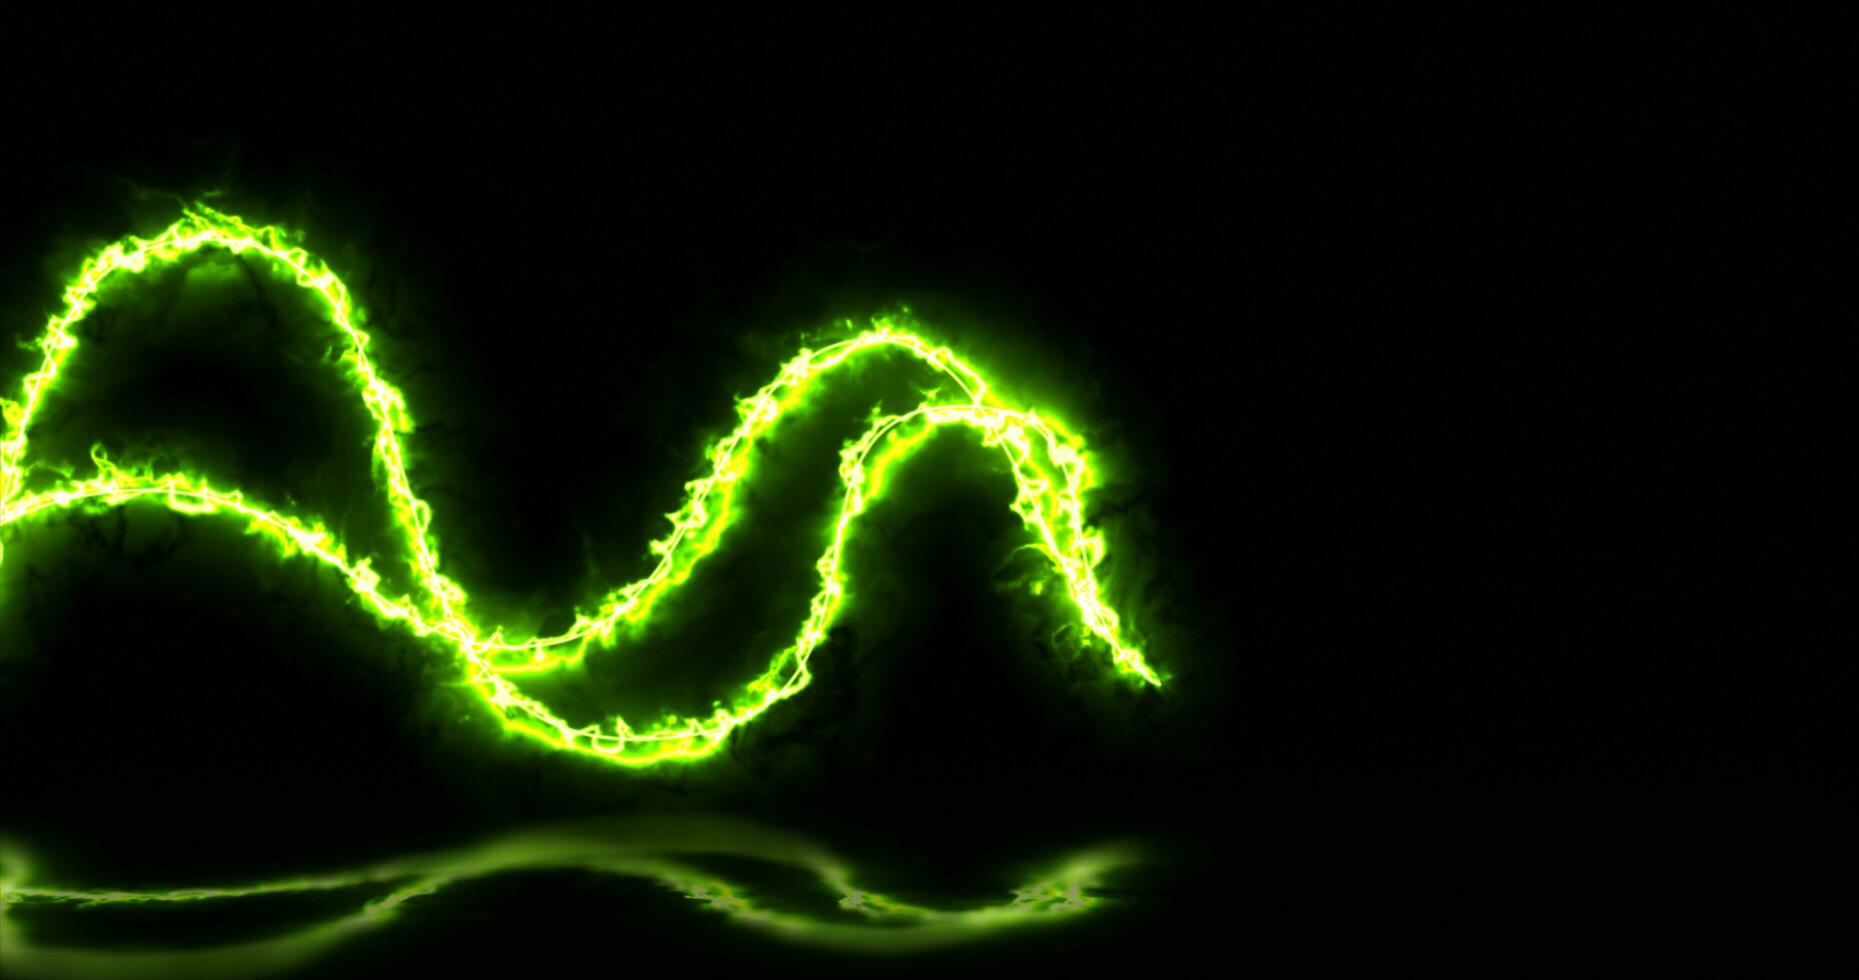 Abstract bright green lines light energy chemical acid magic with reflections abstract background photo